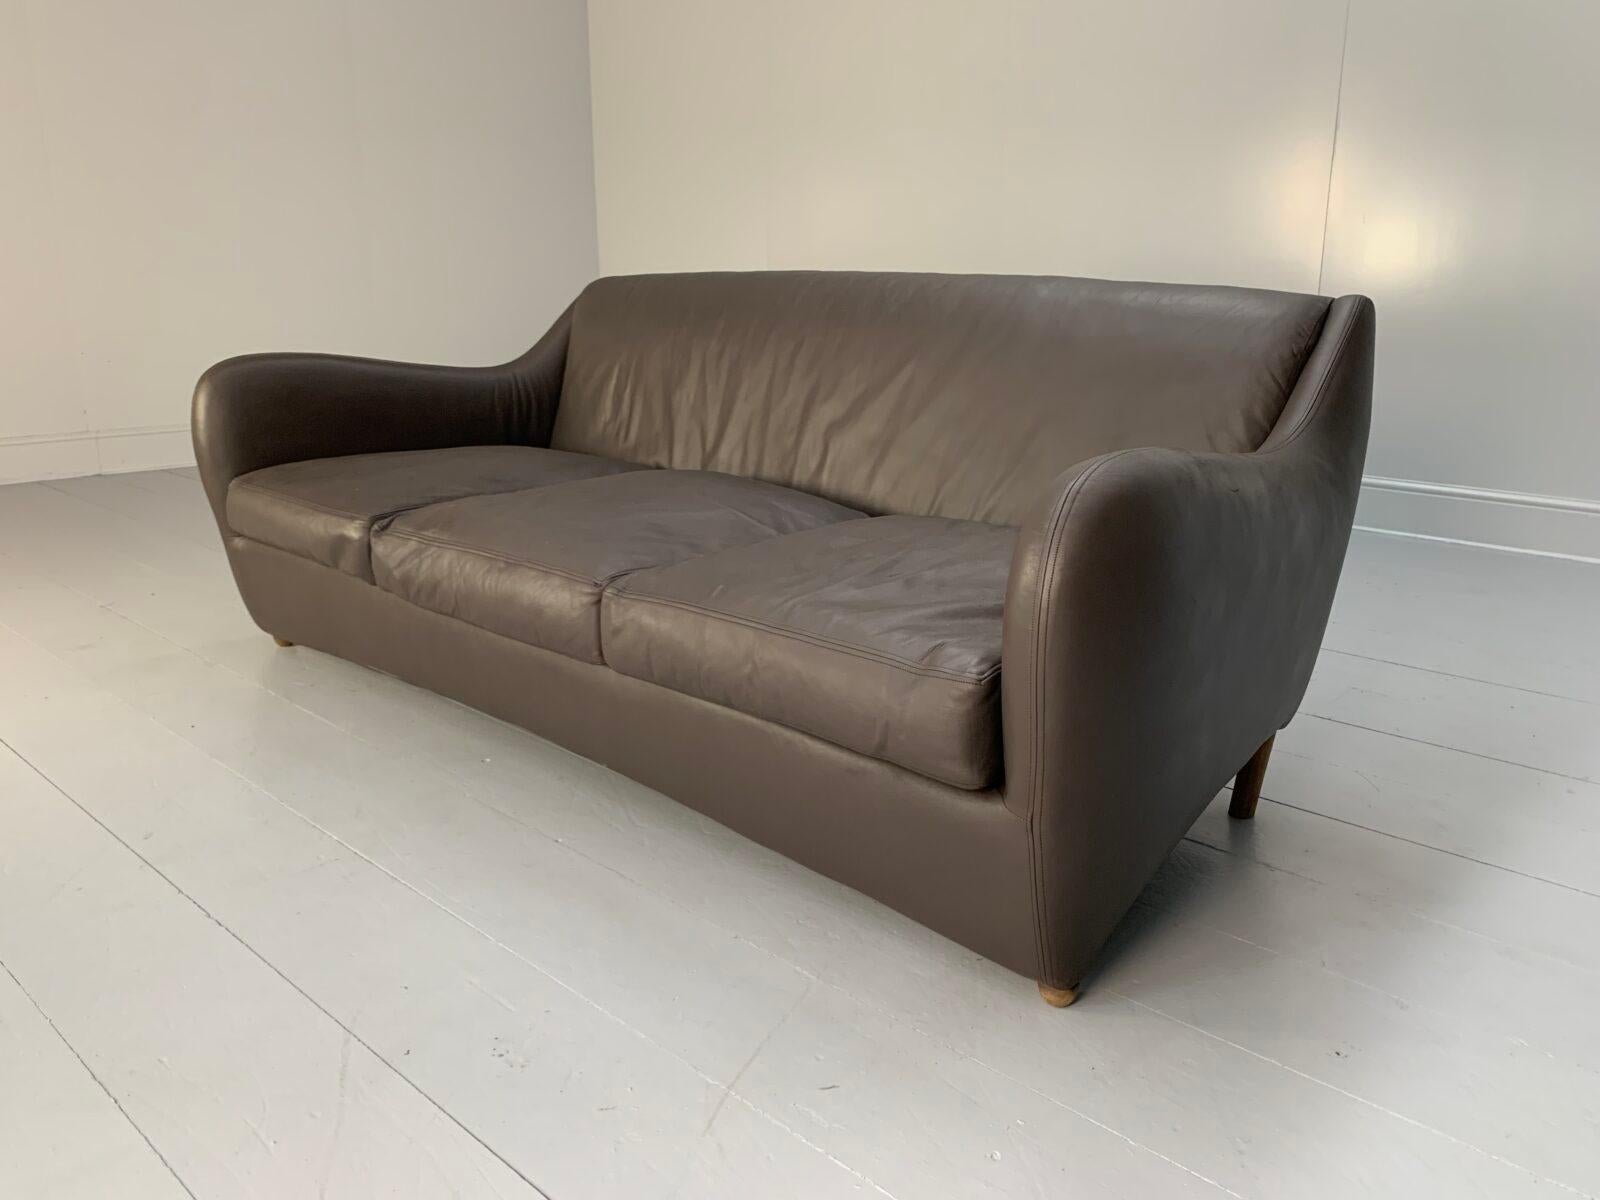 Hello Friends, and welcome to another unmissable offering from Lord Browns Furniture, the UK’s premier resource for fine Sofas and Chairs.

On offer on this occasion is a spectacularly-rare, undeniably-handsome iconic “Balzac” 3-Seat Sofa, dressed